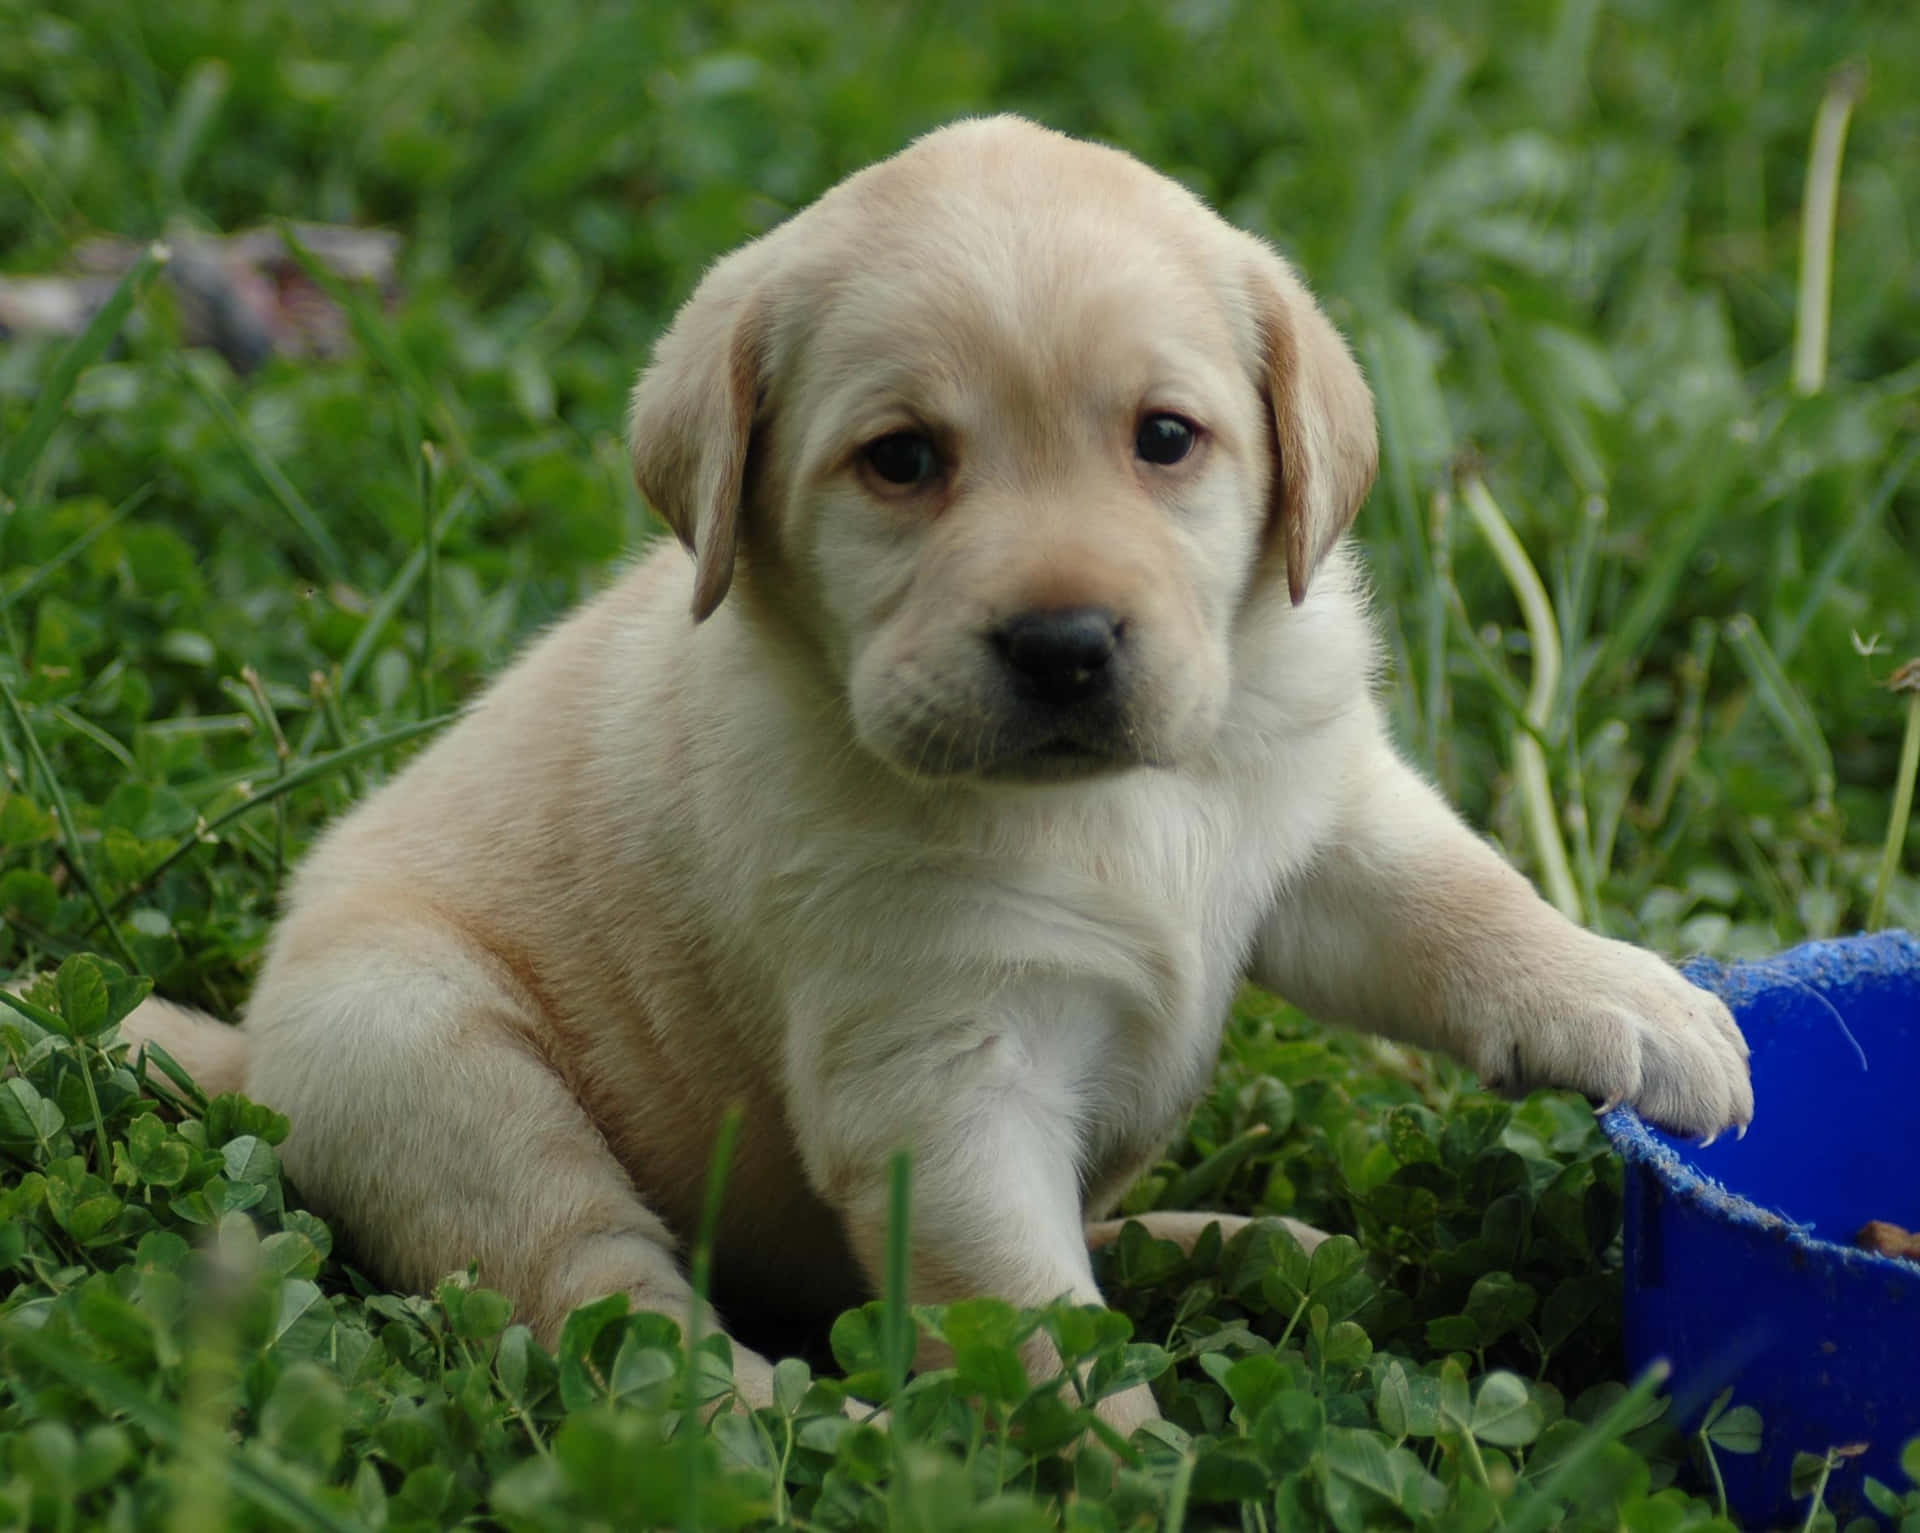 Labrador Puppy With Blue Bowl Picture